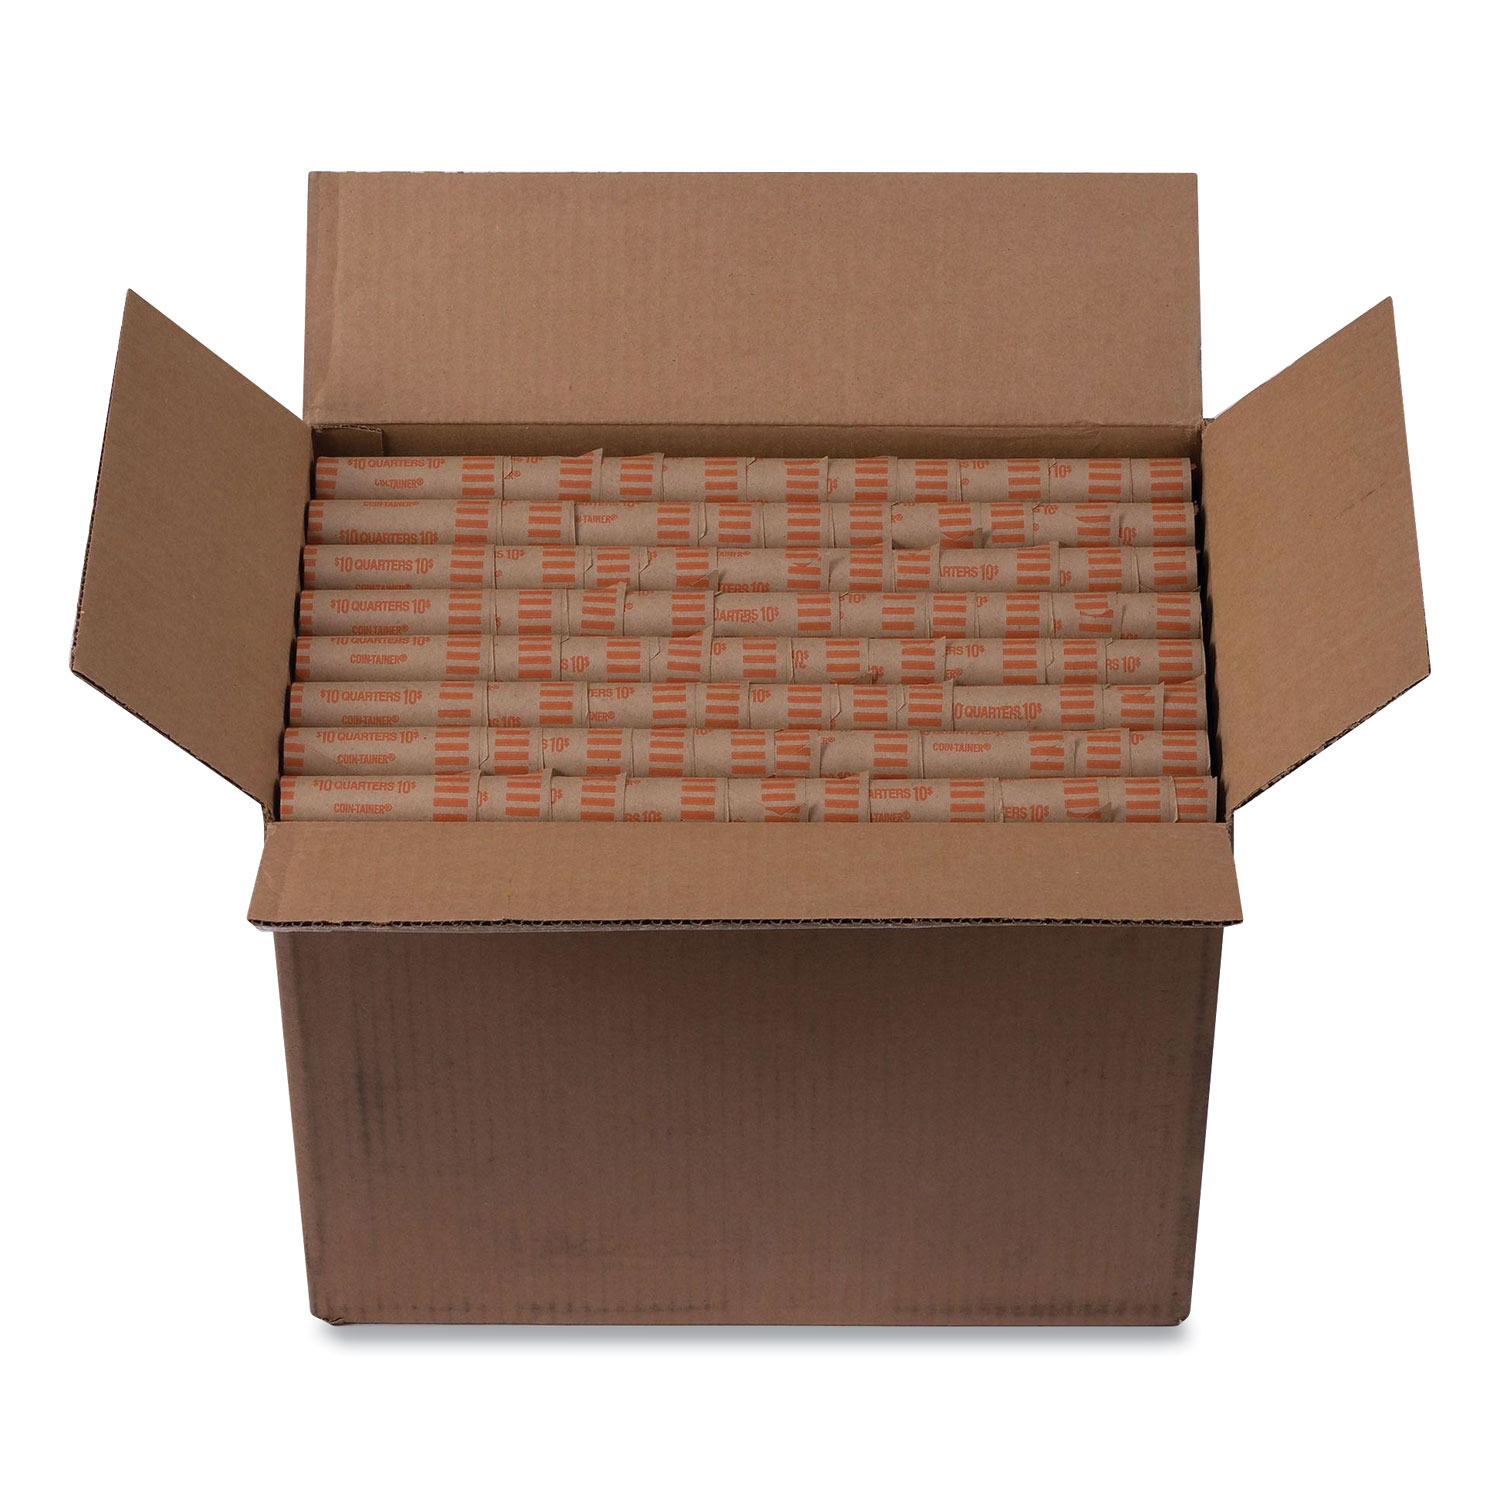  Pap-R Products 23025/2160640 Preformed Tubular Coin Wrappers, Quarters, $10, 1000 Wrappers/Box (PQP2396476) 